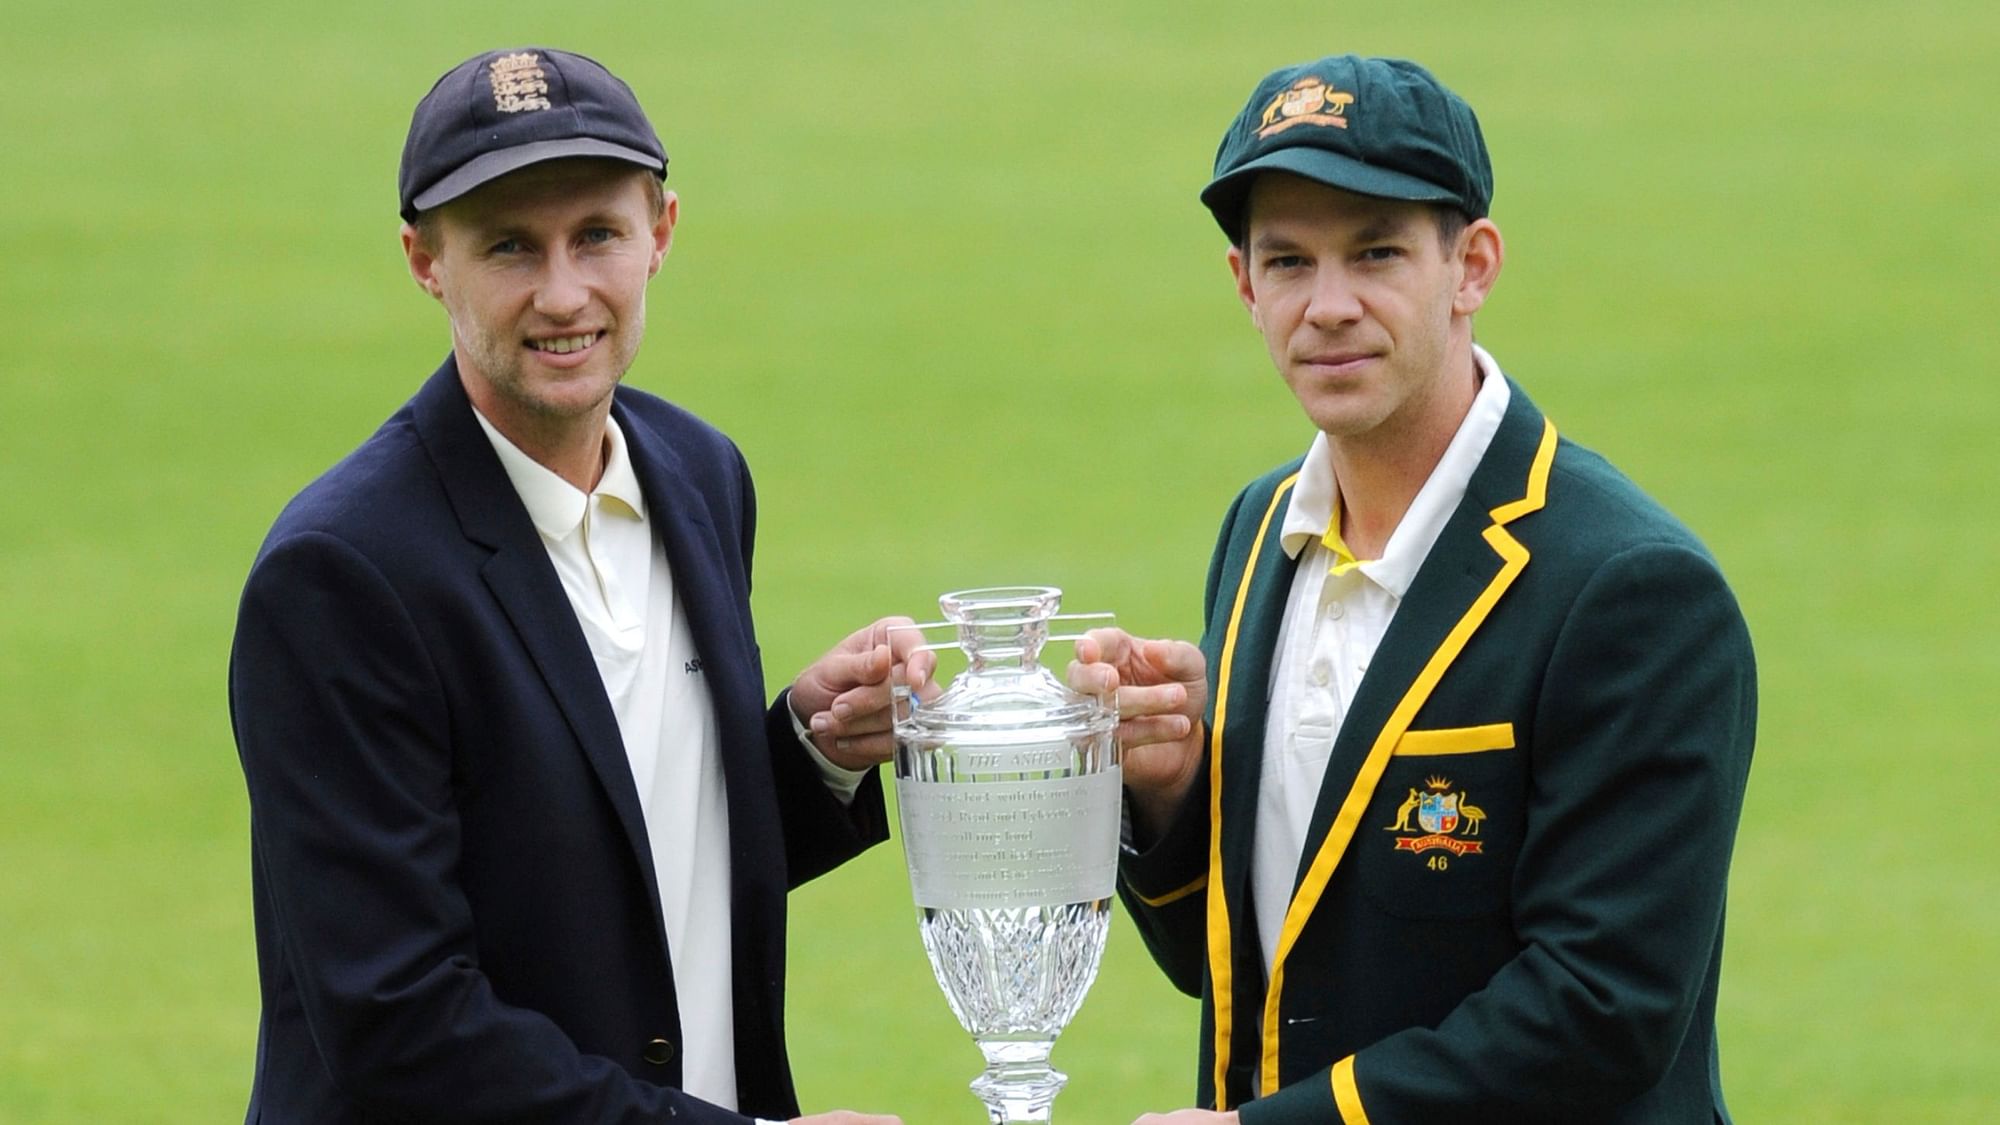 Here’s all you need to know about Eng vs Aus Ashes 2019 match.